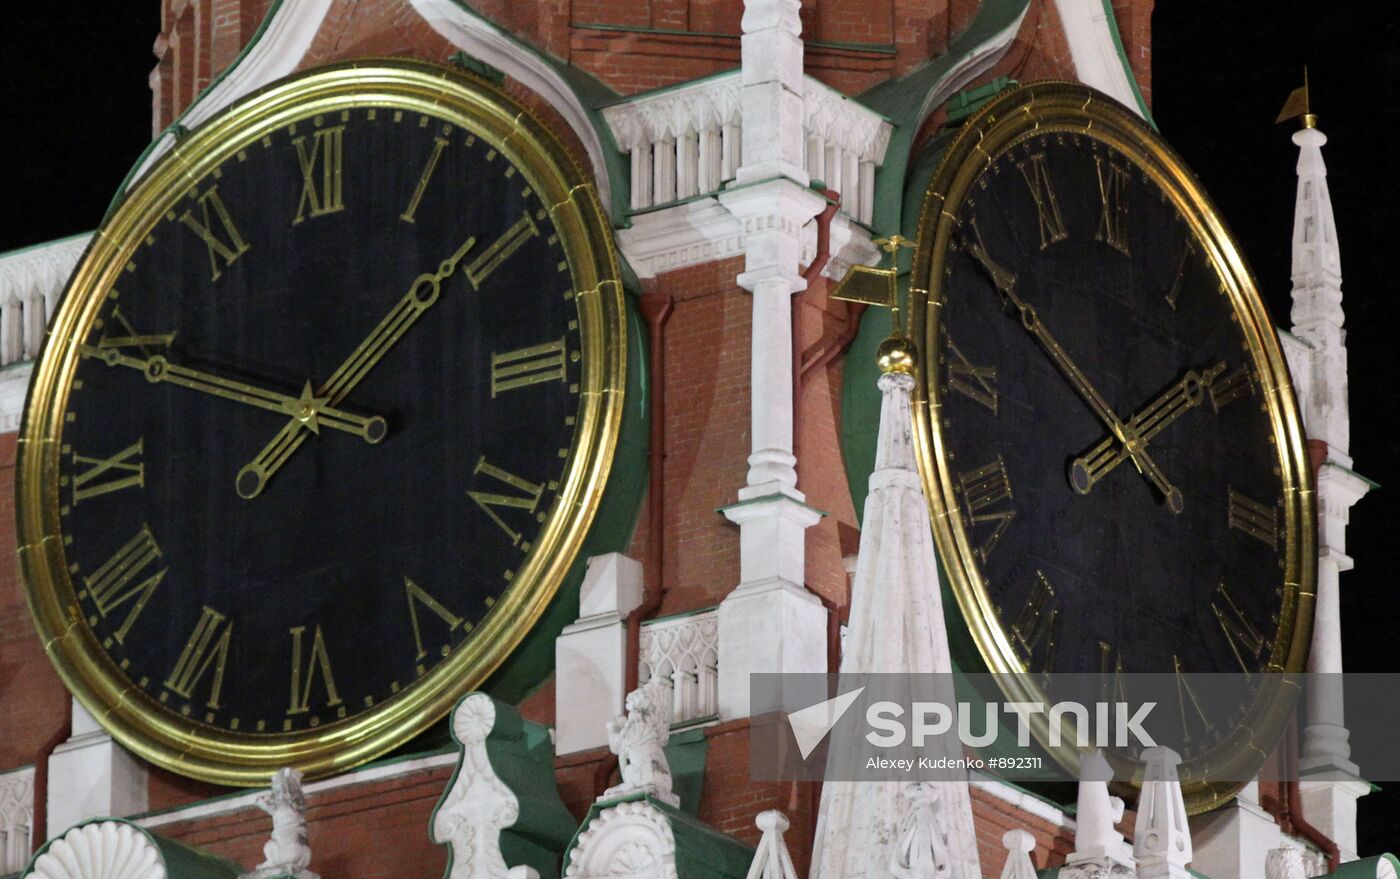 Kremlin clock set one our ahead as Russia switches to DST